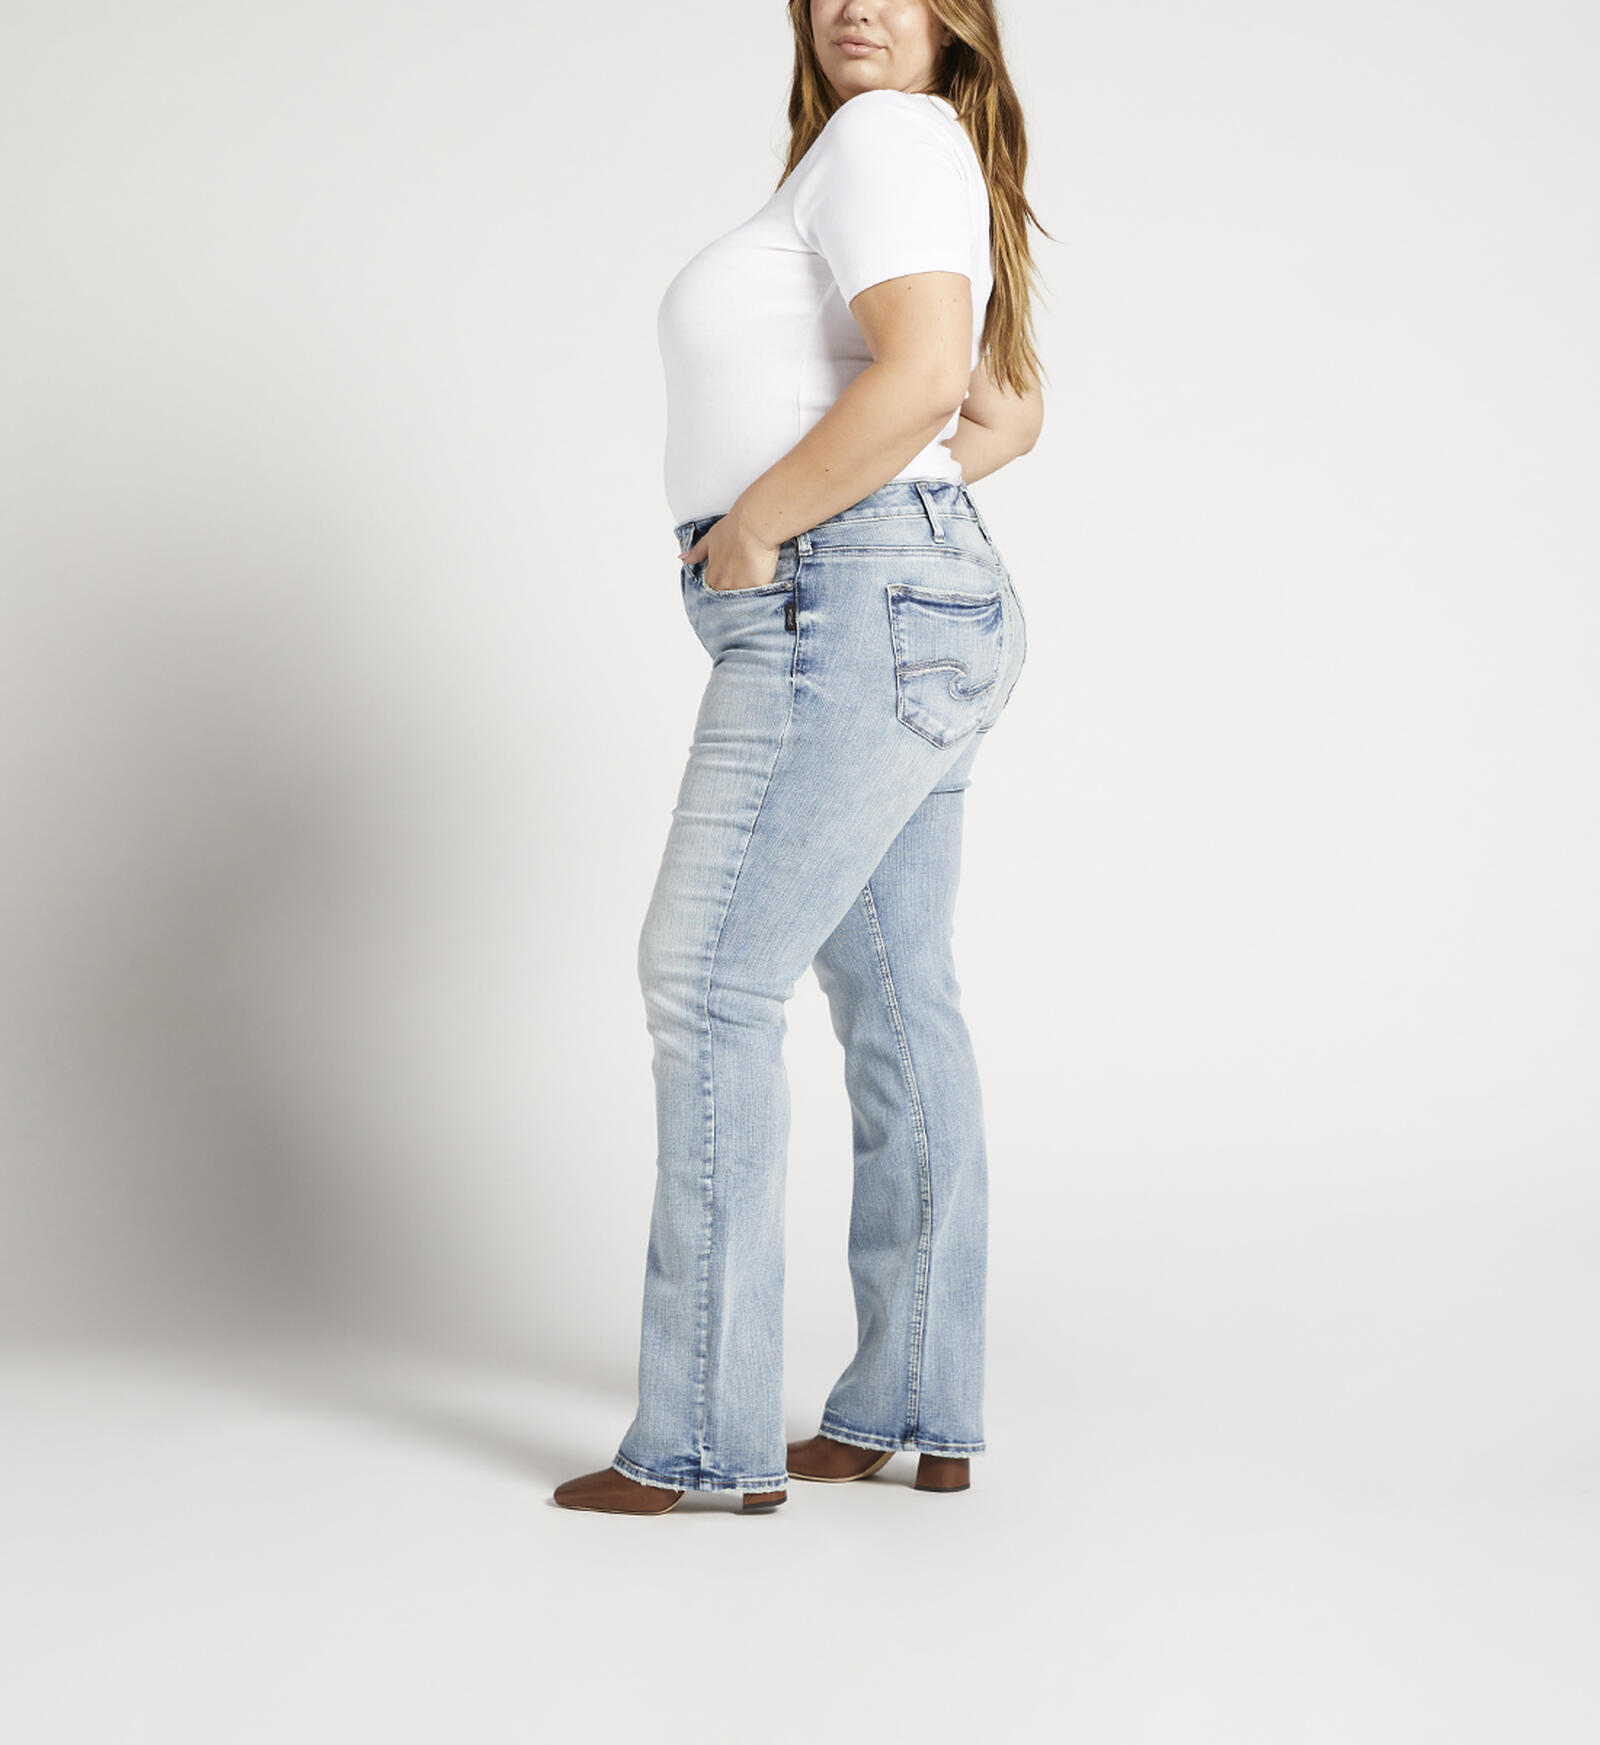 Buy Suki Mid Rise Slim Bootcut Jeans Plus Size for USD 59.00